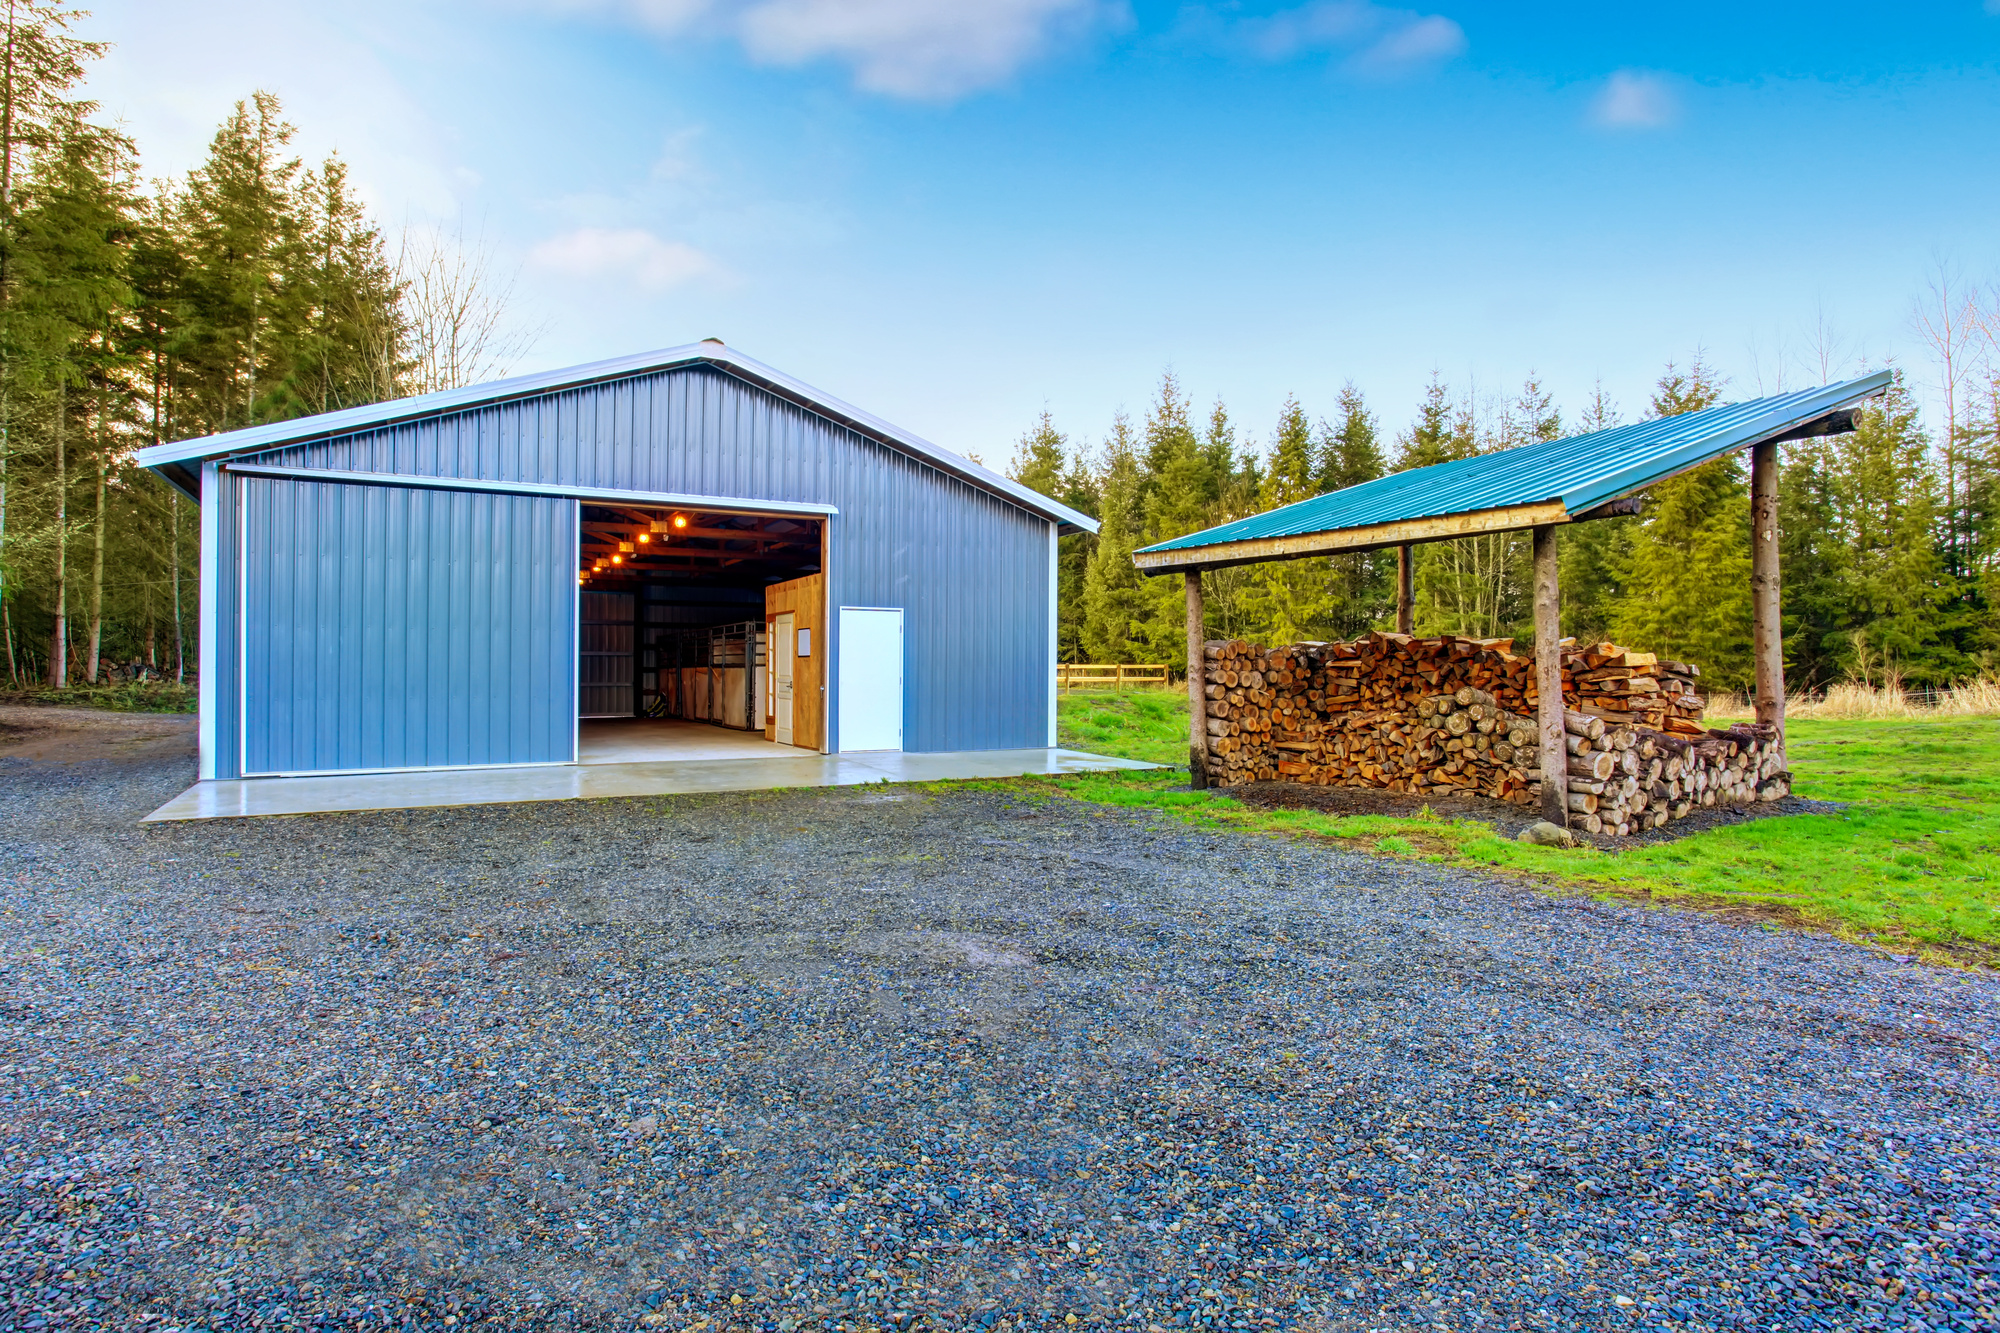 Before you build a metal garage, you should know how much it'll cost. This informative guide covers the prices you can expect to pay.